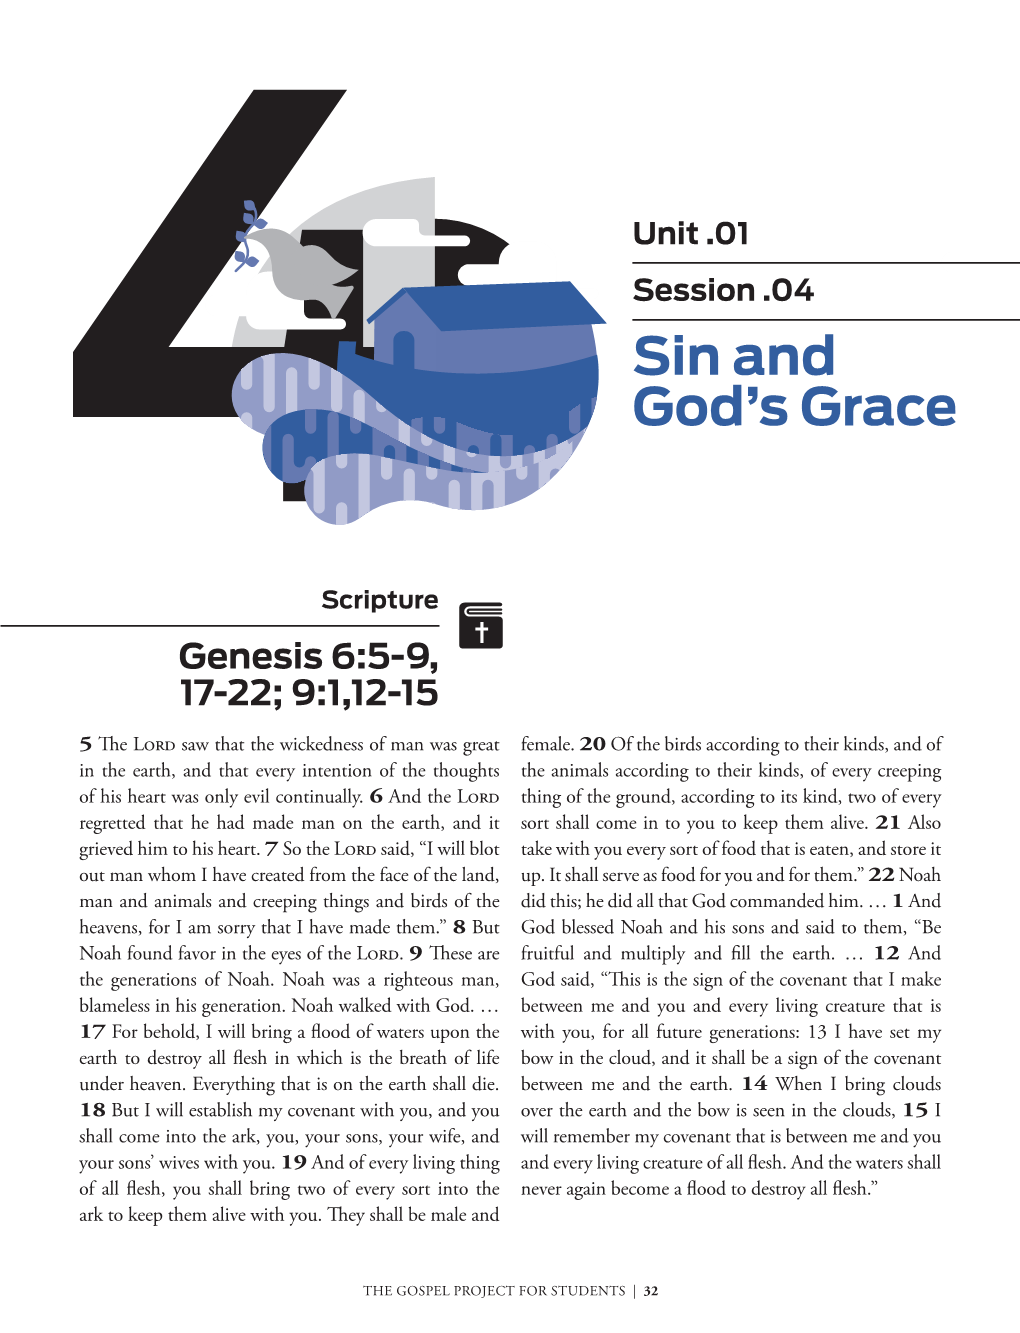 Sin and God's Grace